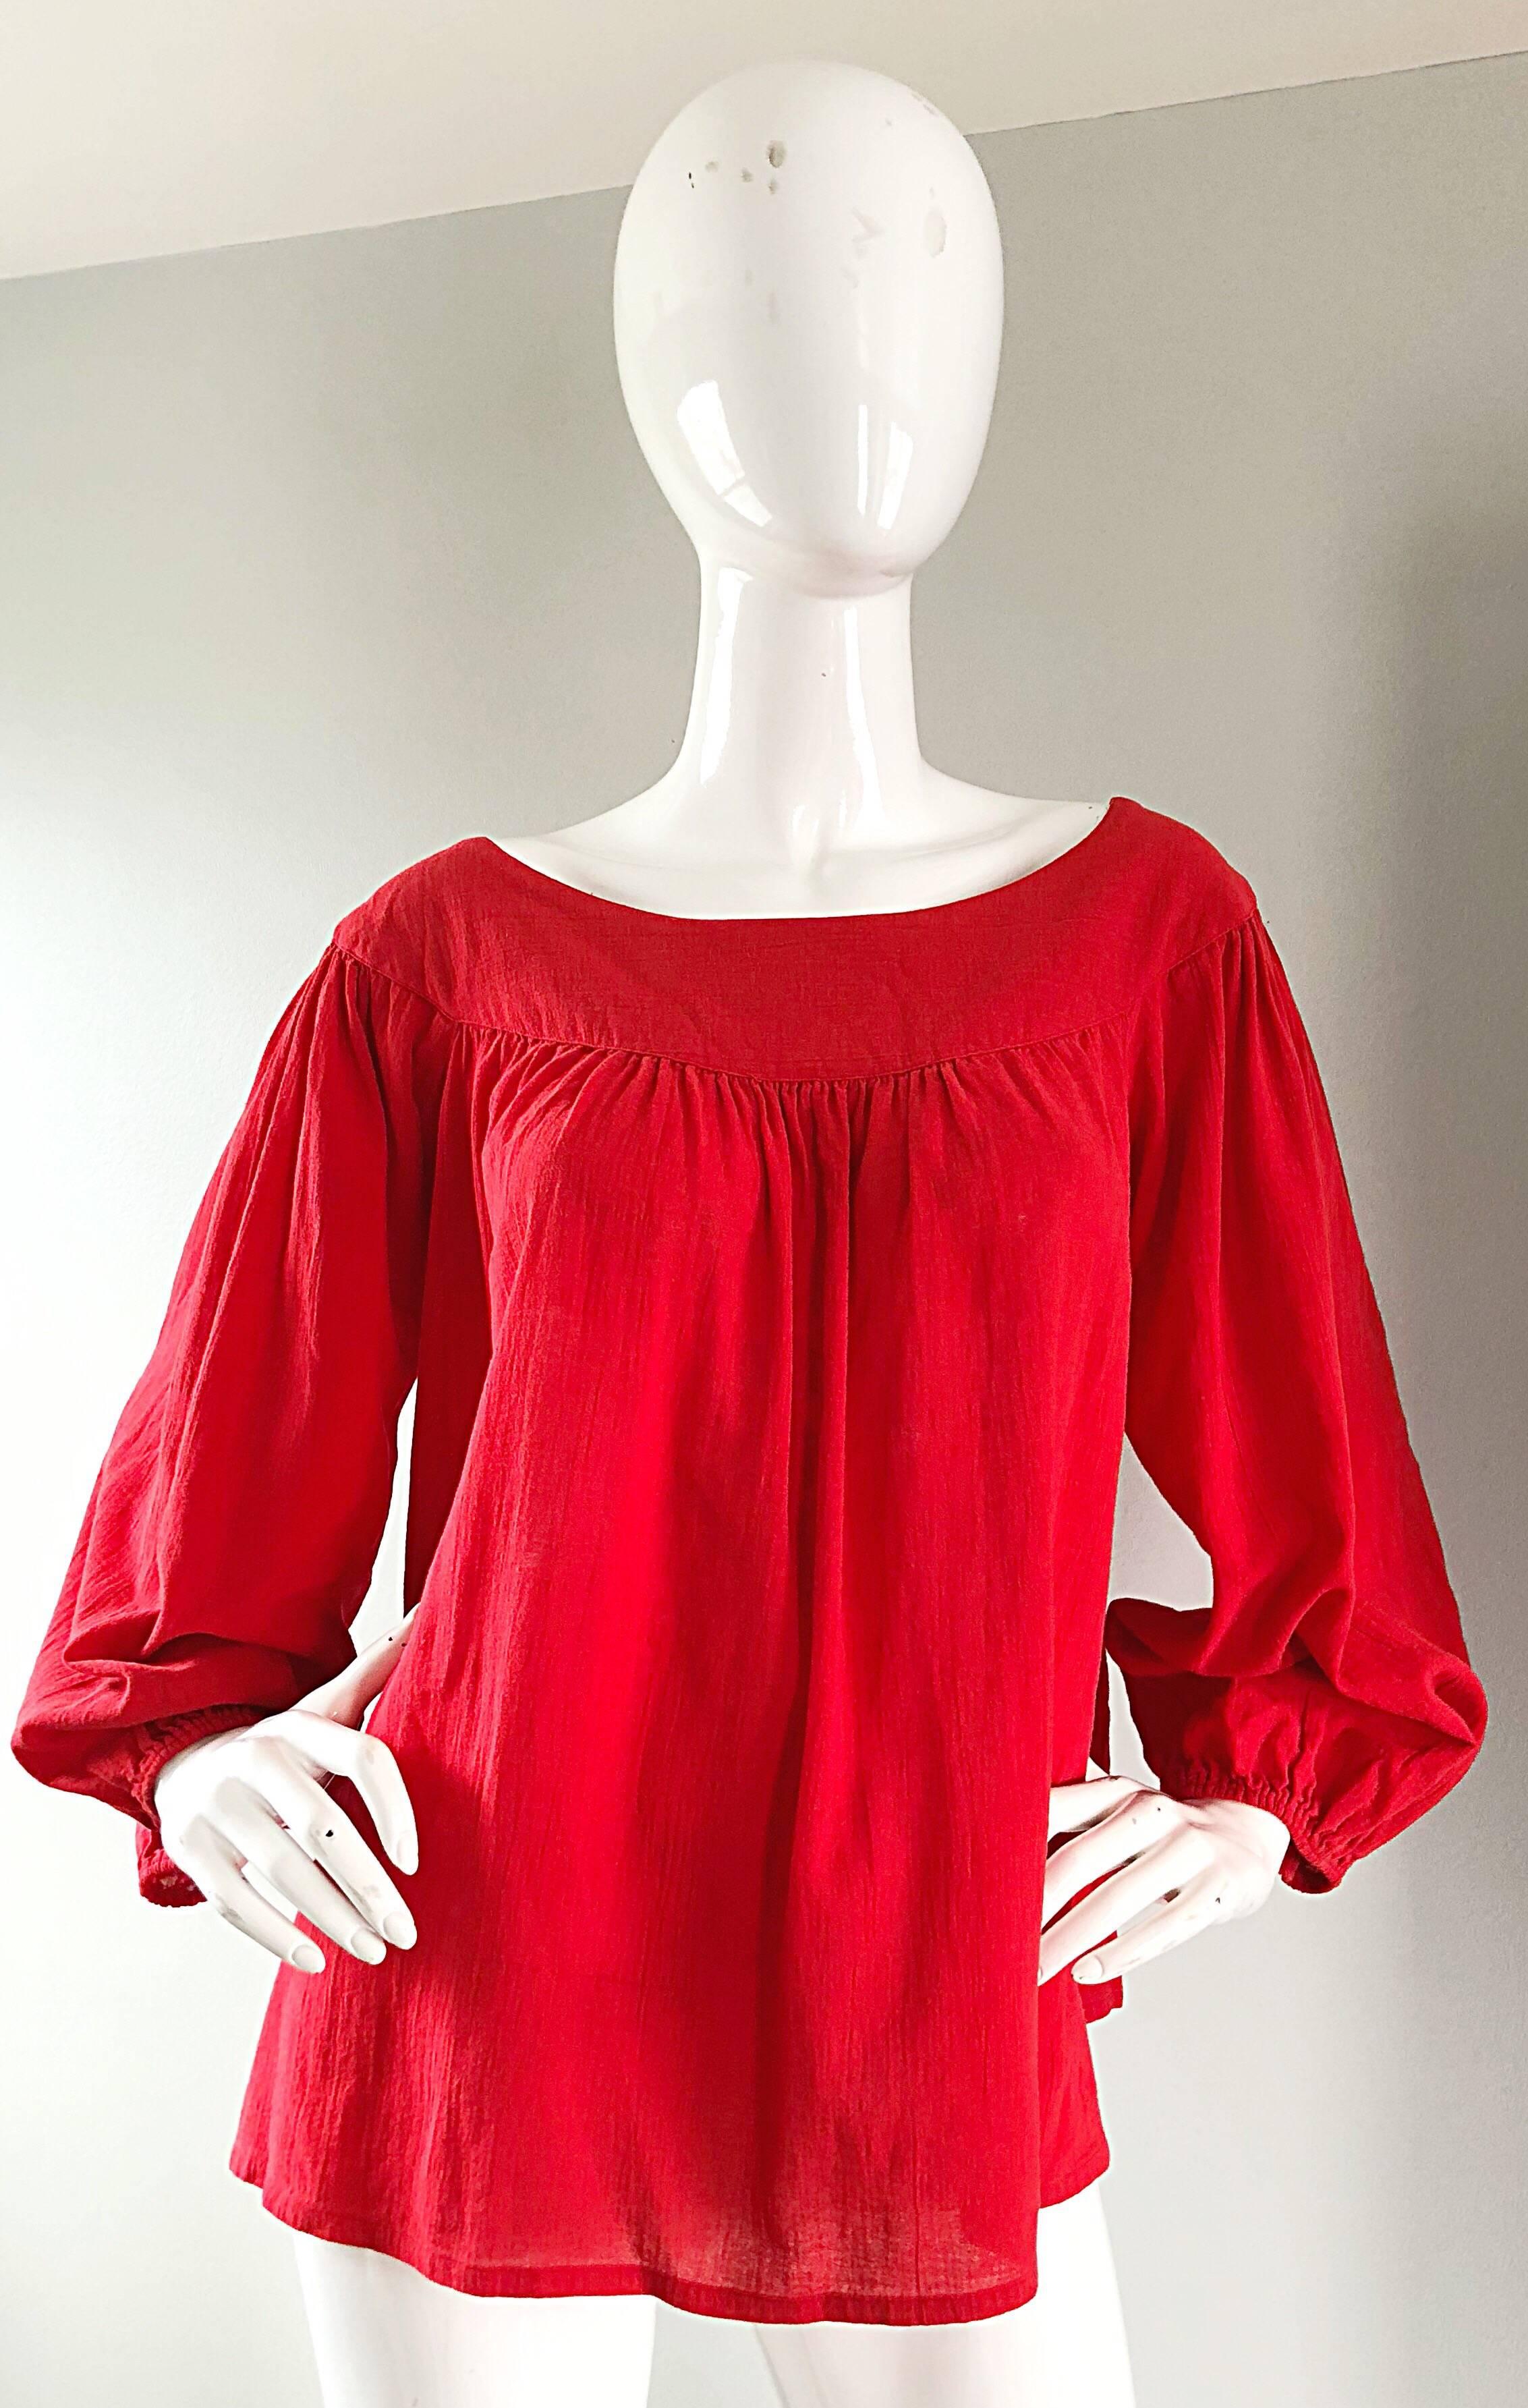 Rare and collectible vintage 70s YSL Rive Gauche cotton peasant shirt from the infamous 1976 RUSSIAN COLLECTION! Features a lightweight textured cotton that looks fantastic on! Boat neck, with a forgiving trapeze empire waist. Elastic cuffs at each